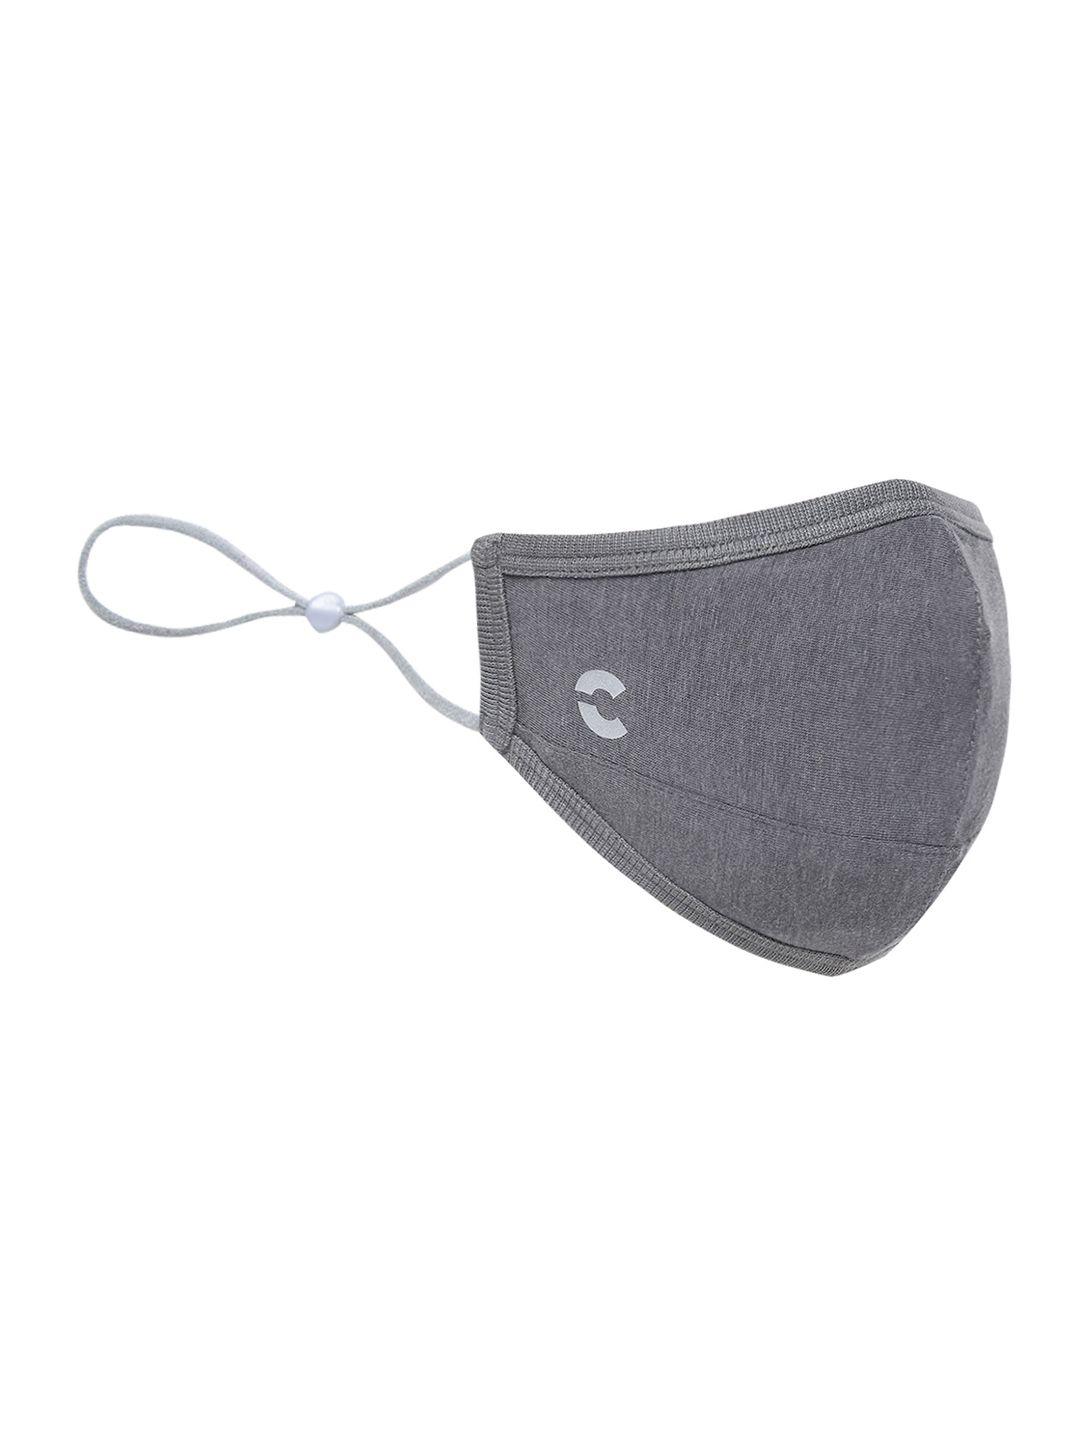 freecultr charcoal grey 5ply bamboo cotton anti-microbial comfort fit reusable cloth mask